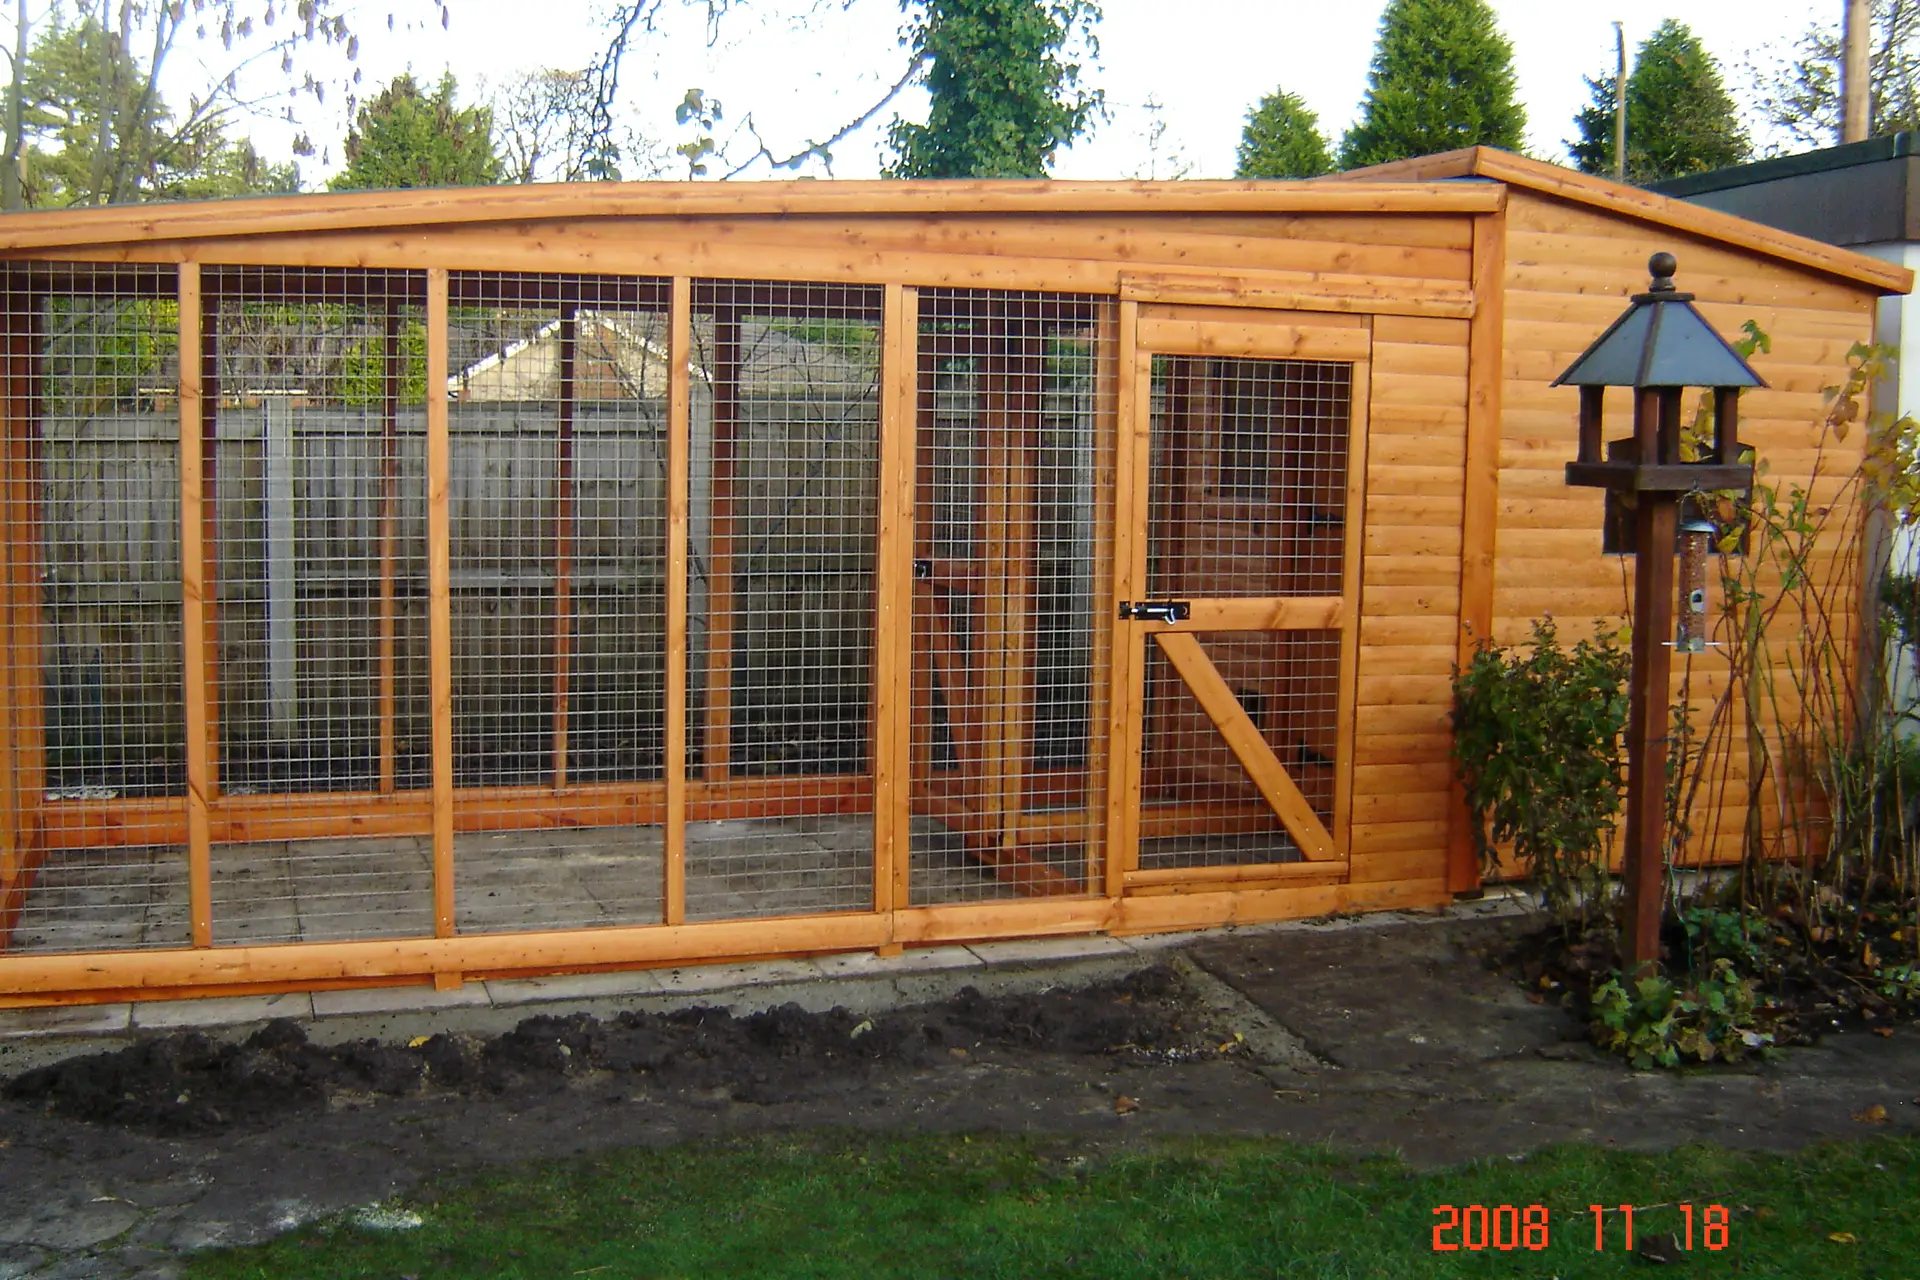 This is a cattery with a sleeping compartment and a covered run